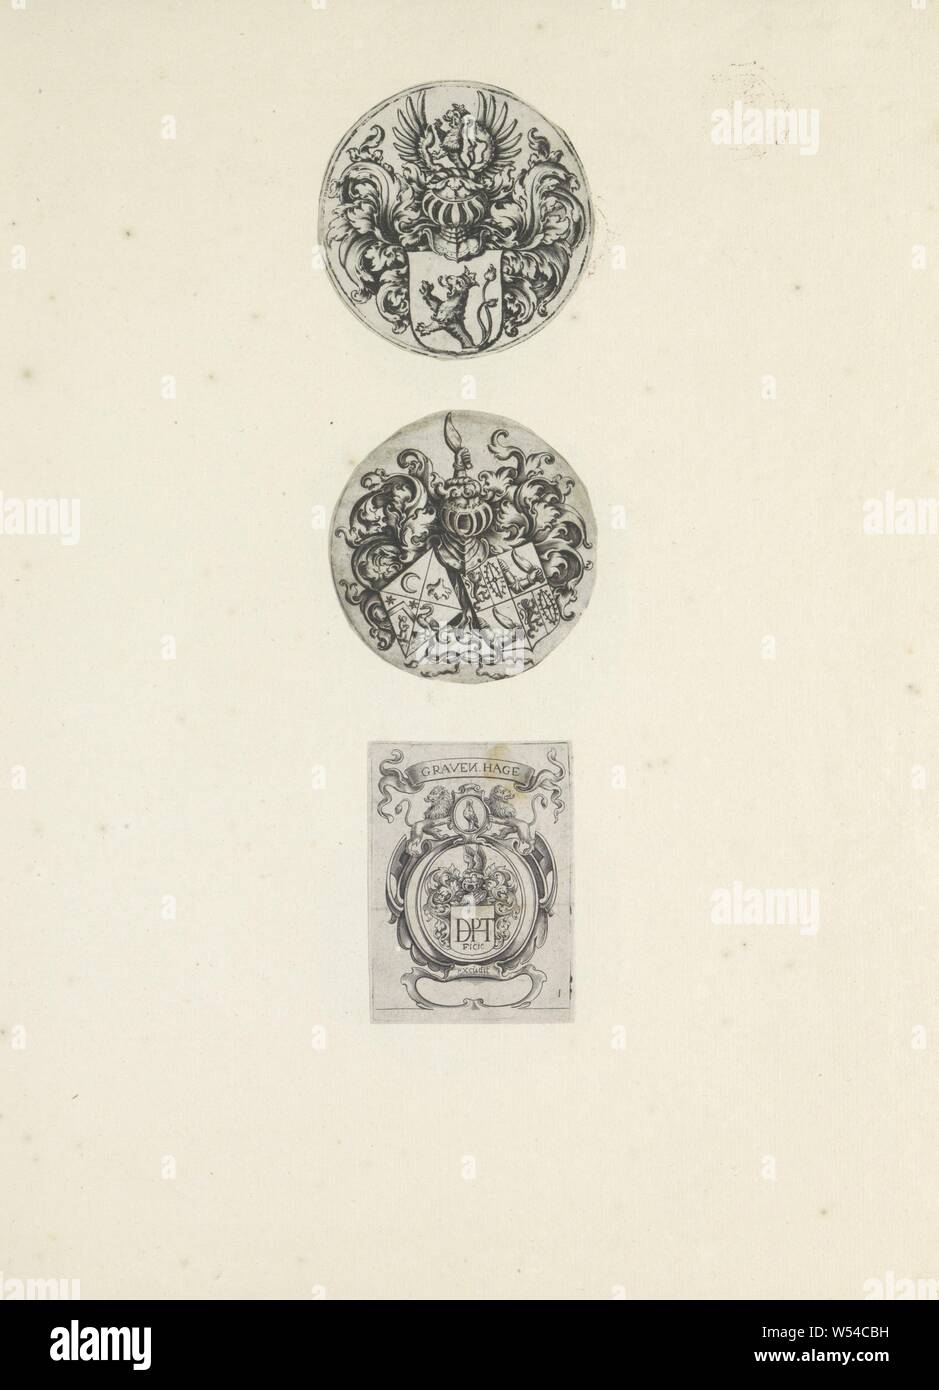 Three weapons, Three representations on an album page. Above a weapon with a half climbing lion. Below that is a weapon with a double shield. The right-hand part refers to the Coltermans family: a armored arm with a knife, a four-wheeled mill wheel, and a climbing lion. At the bottom the coat of arms of The Hague and a shield with the monogram DPT or HDPT, numbered 1. The prints are part of an album, armorial bearing, heraldry, anonymous, 1600 - 1699, paper, engraving, h 383 mm × w 310 mm Stock Photo